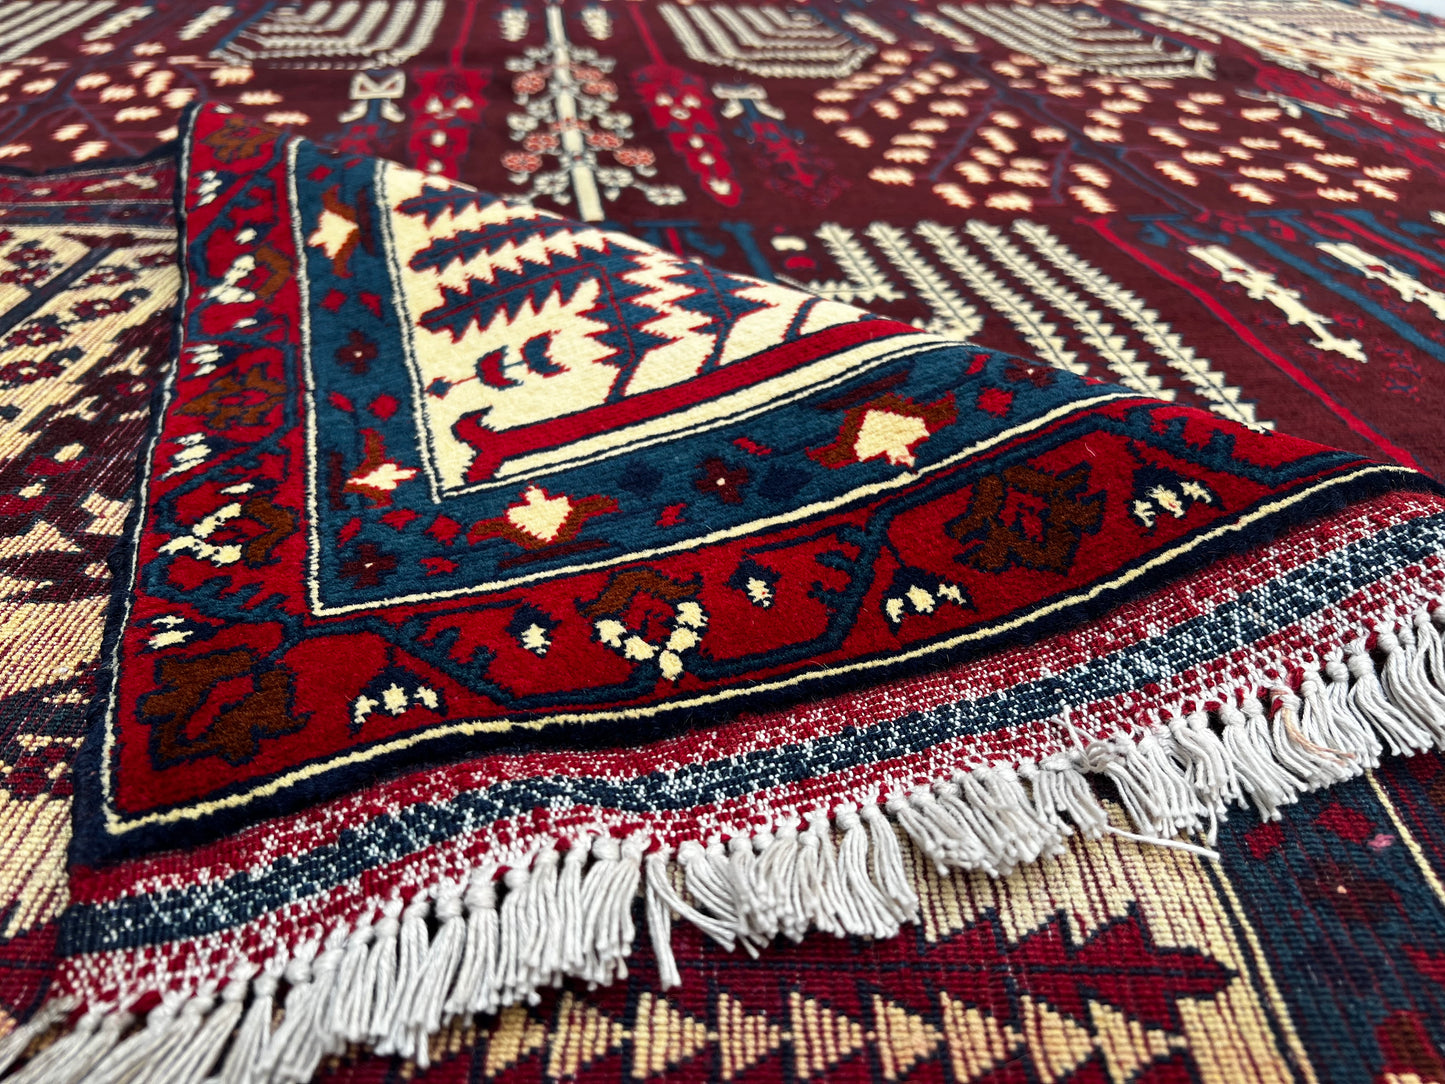 Afghan Hand Knitted/Knotted Area Rug Size 9.5ft x6.5ft (BL-AND-9.5X6.5-R/WH-N) Belgic (Belgique)( Andkhoi) - Kabul Rugs